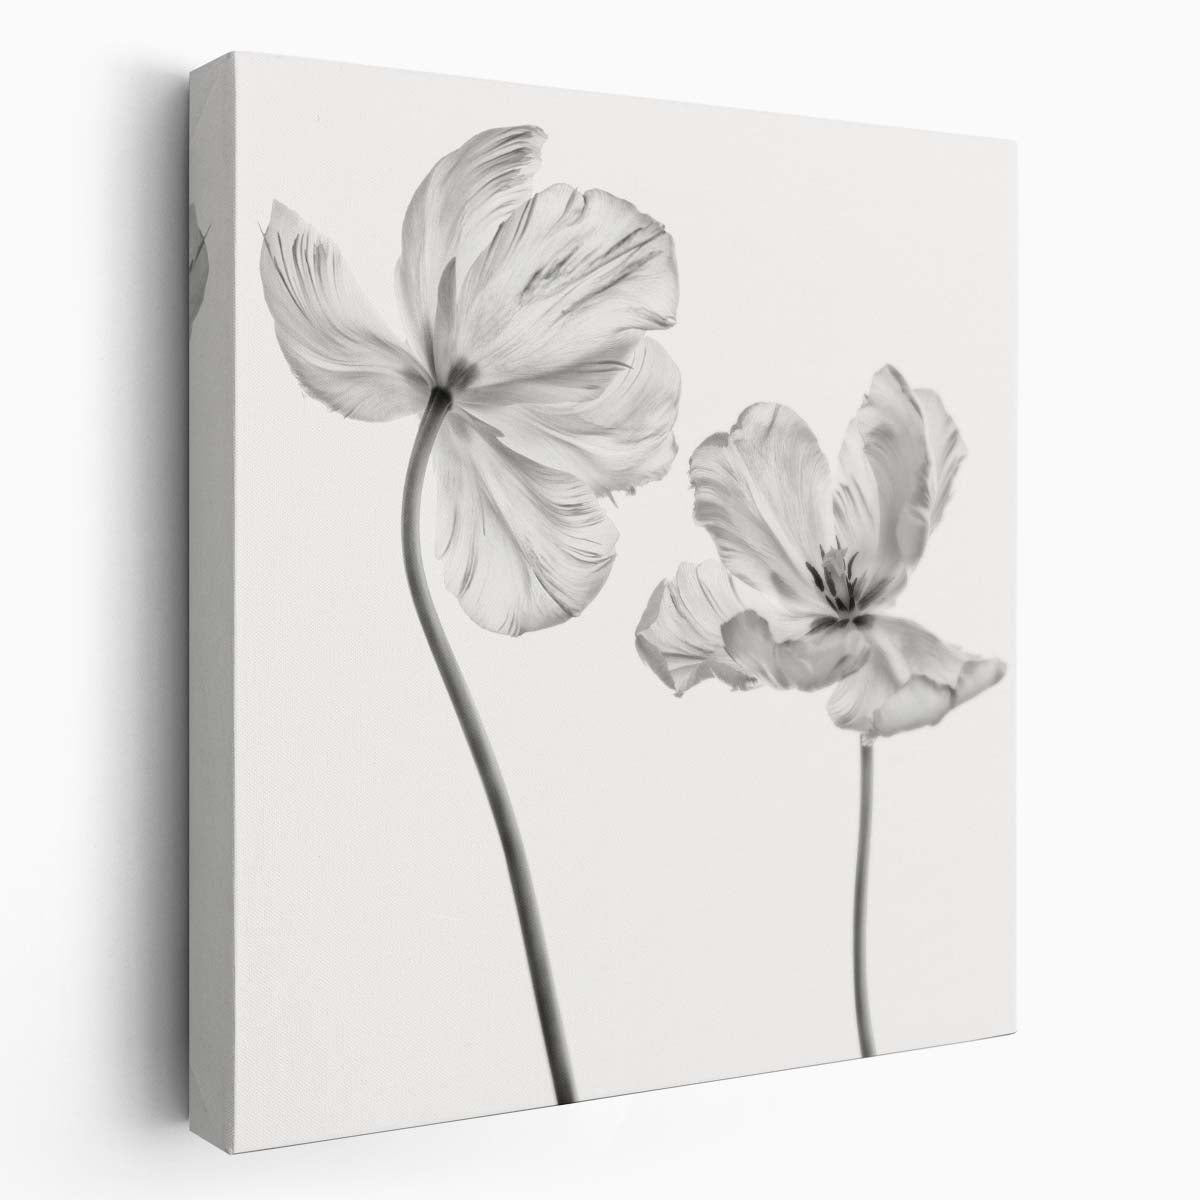 Macro Monochrome Tulip Floral Botanical Photography Wall Art by Luxuriance Designs. Made in USA.